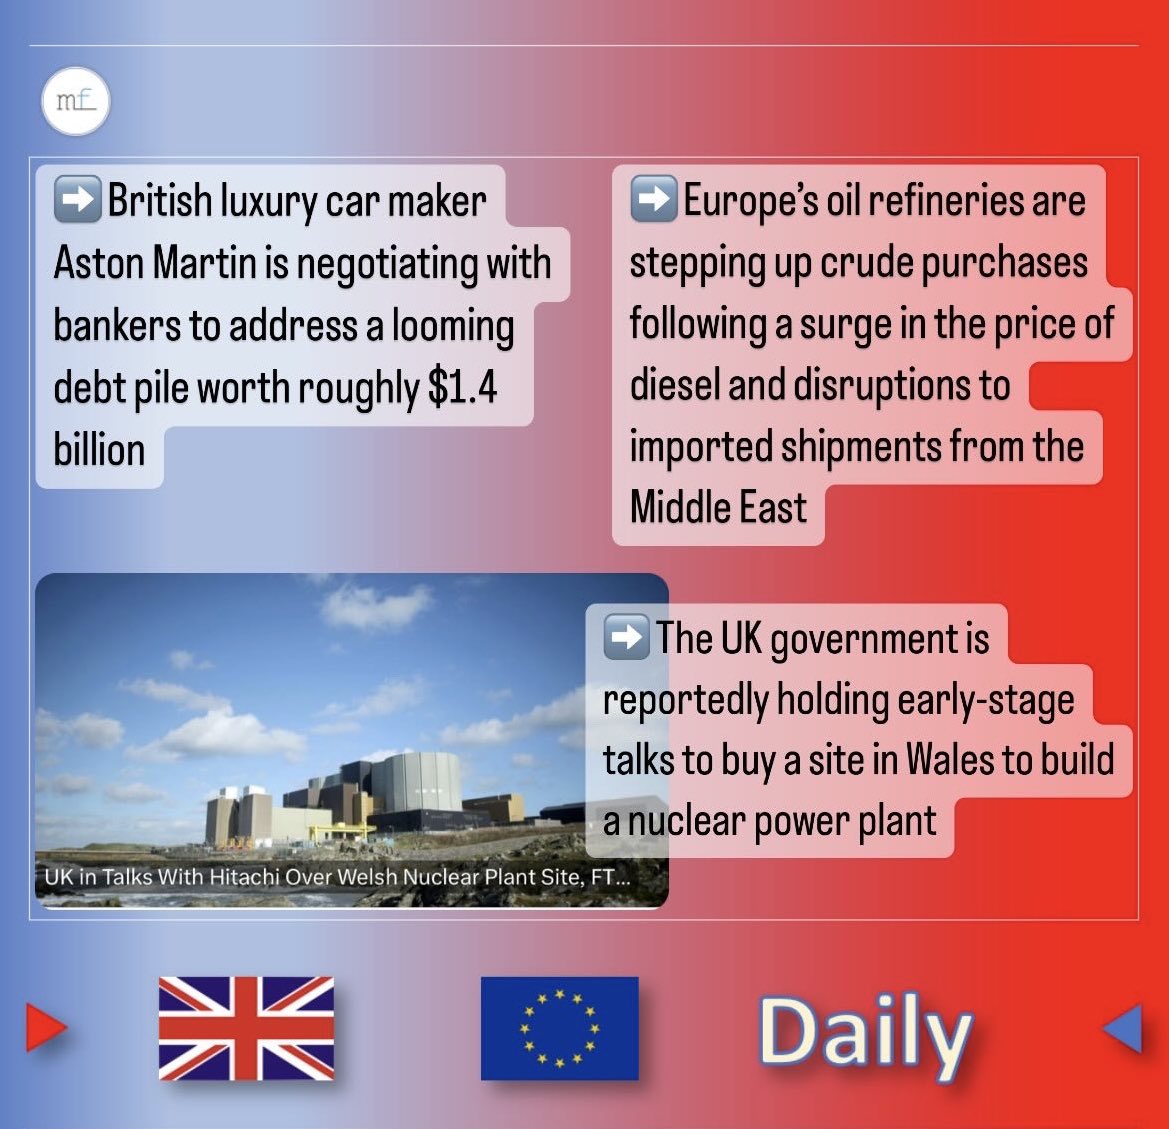 #Brexit daily #BrexitNews day 1️⃣1️⃣3️⃣8️⃣ #energytransition #trade #supplychain #business #logistics #Logistik #trade #export #import #customs #Finance #motionfinity #finances #financialservices #GDP #ukca #research #Science #space